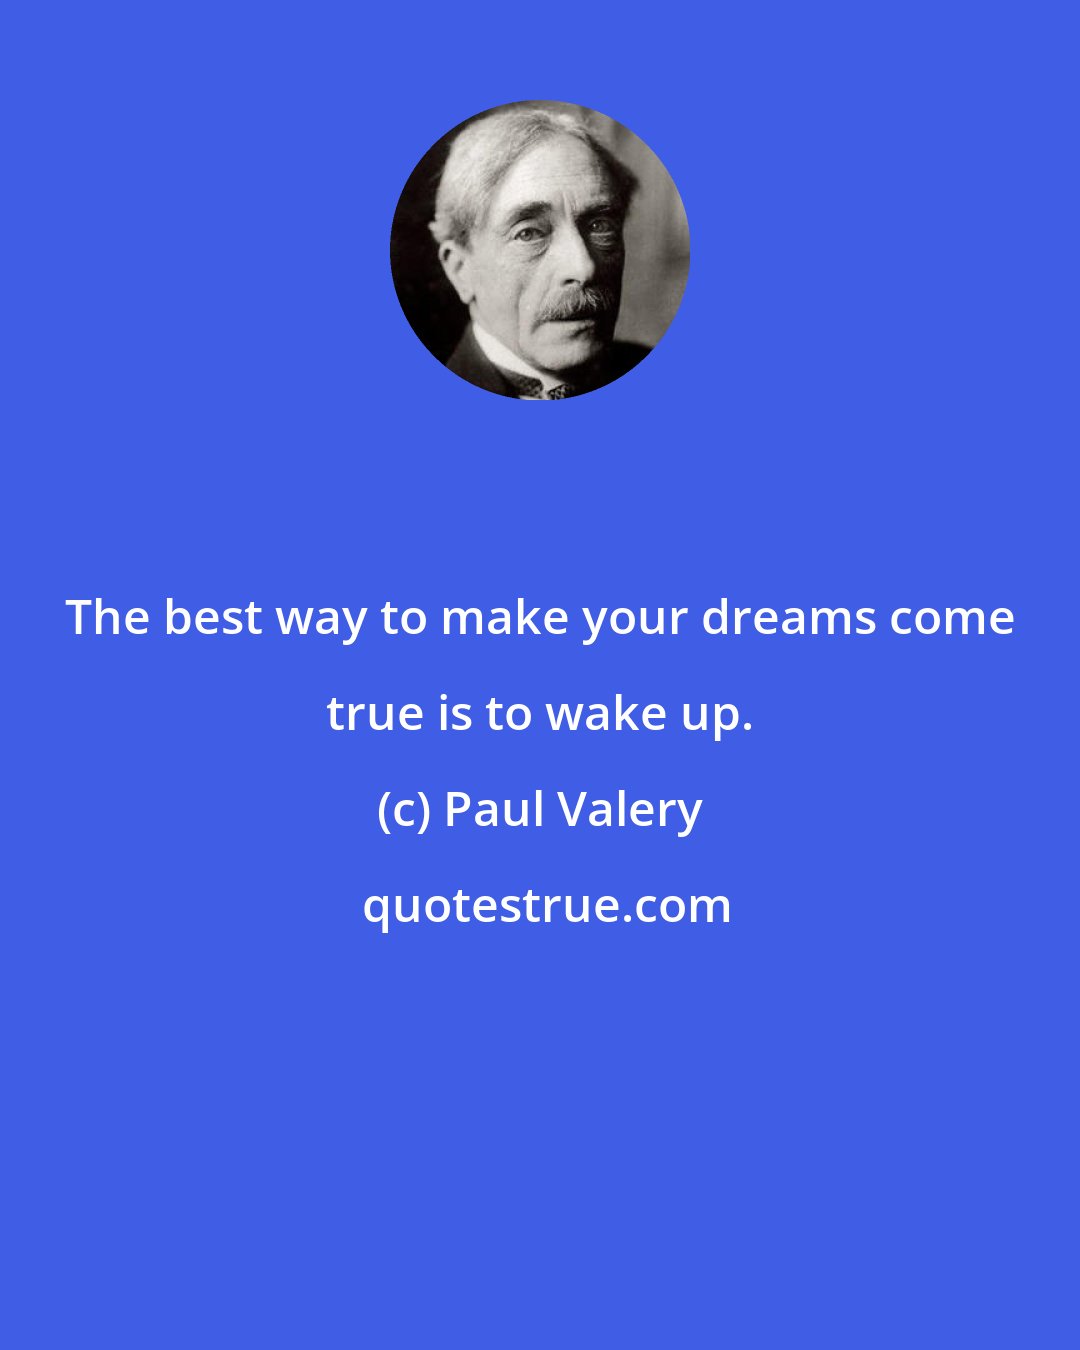 Paul Valery: The best way to make your dreams come true is to wake up.